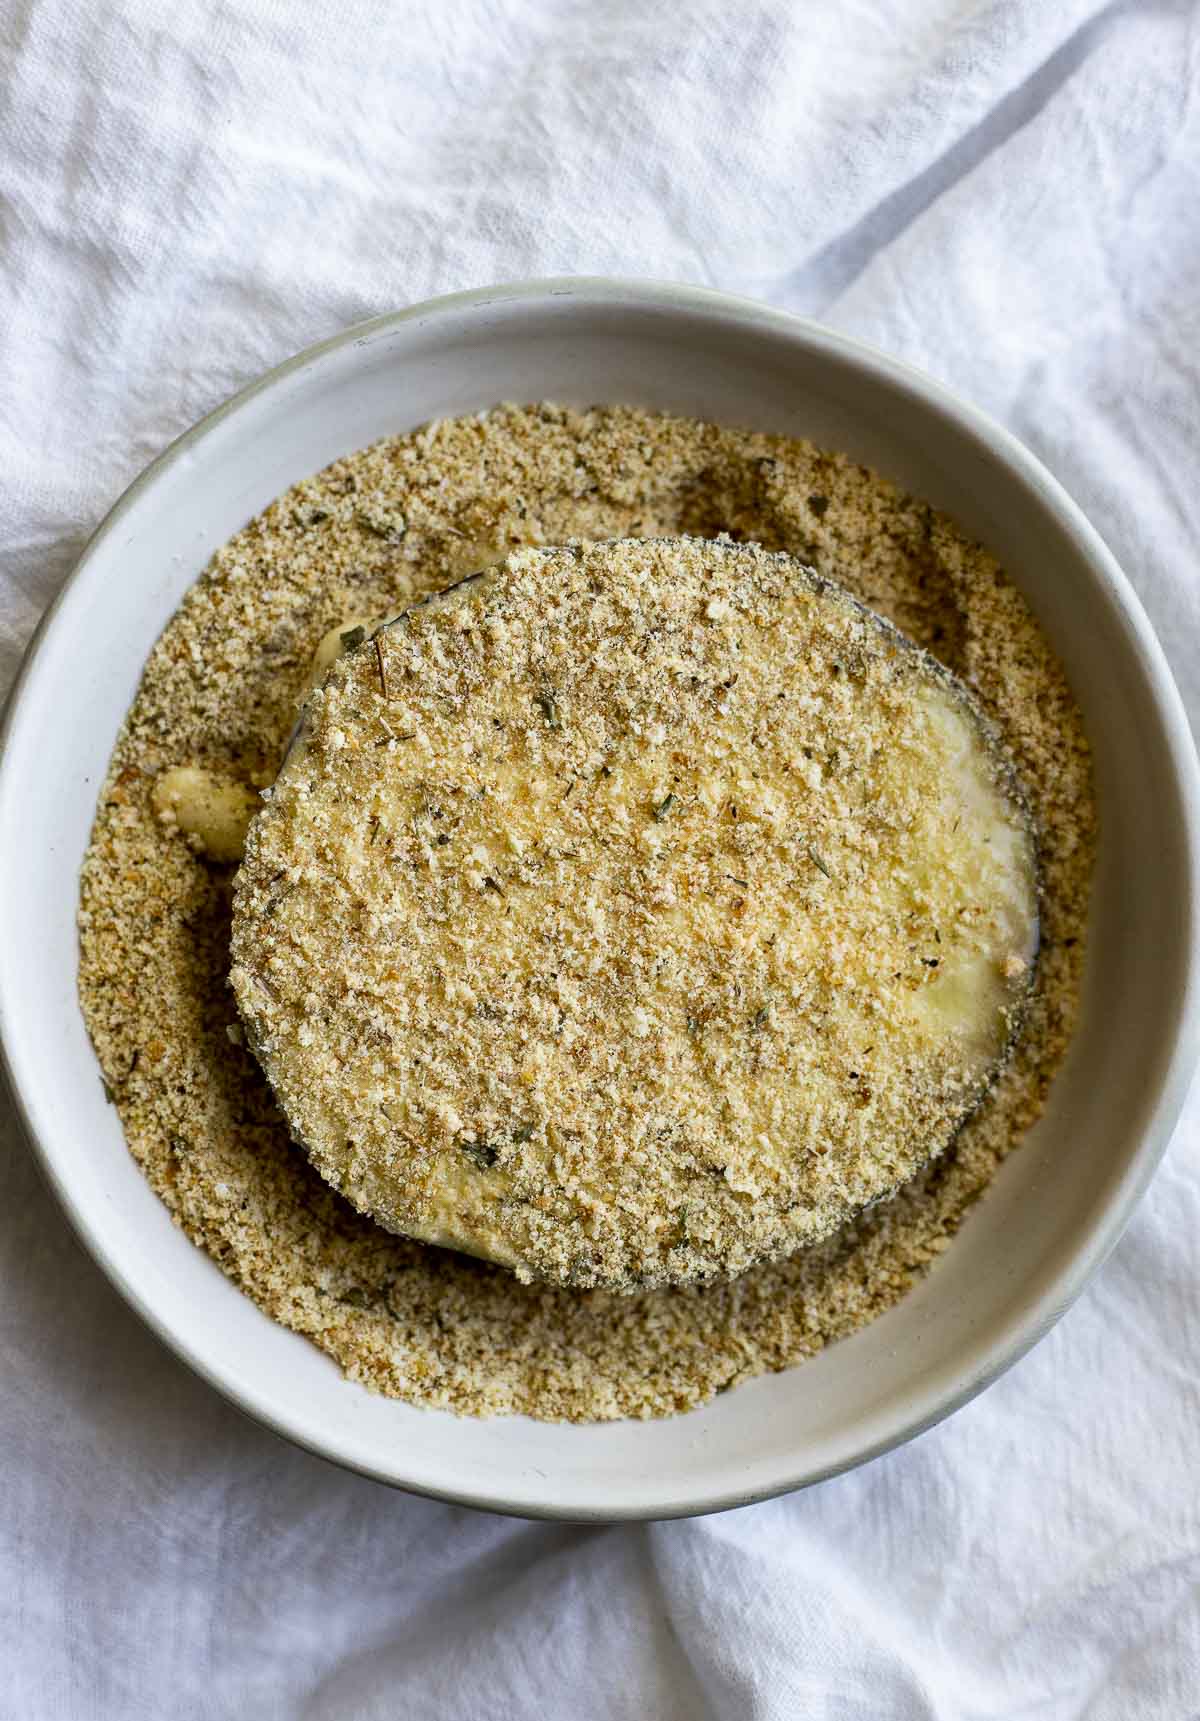 Slice of eggplant being coated in the breadcrumb mixture.